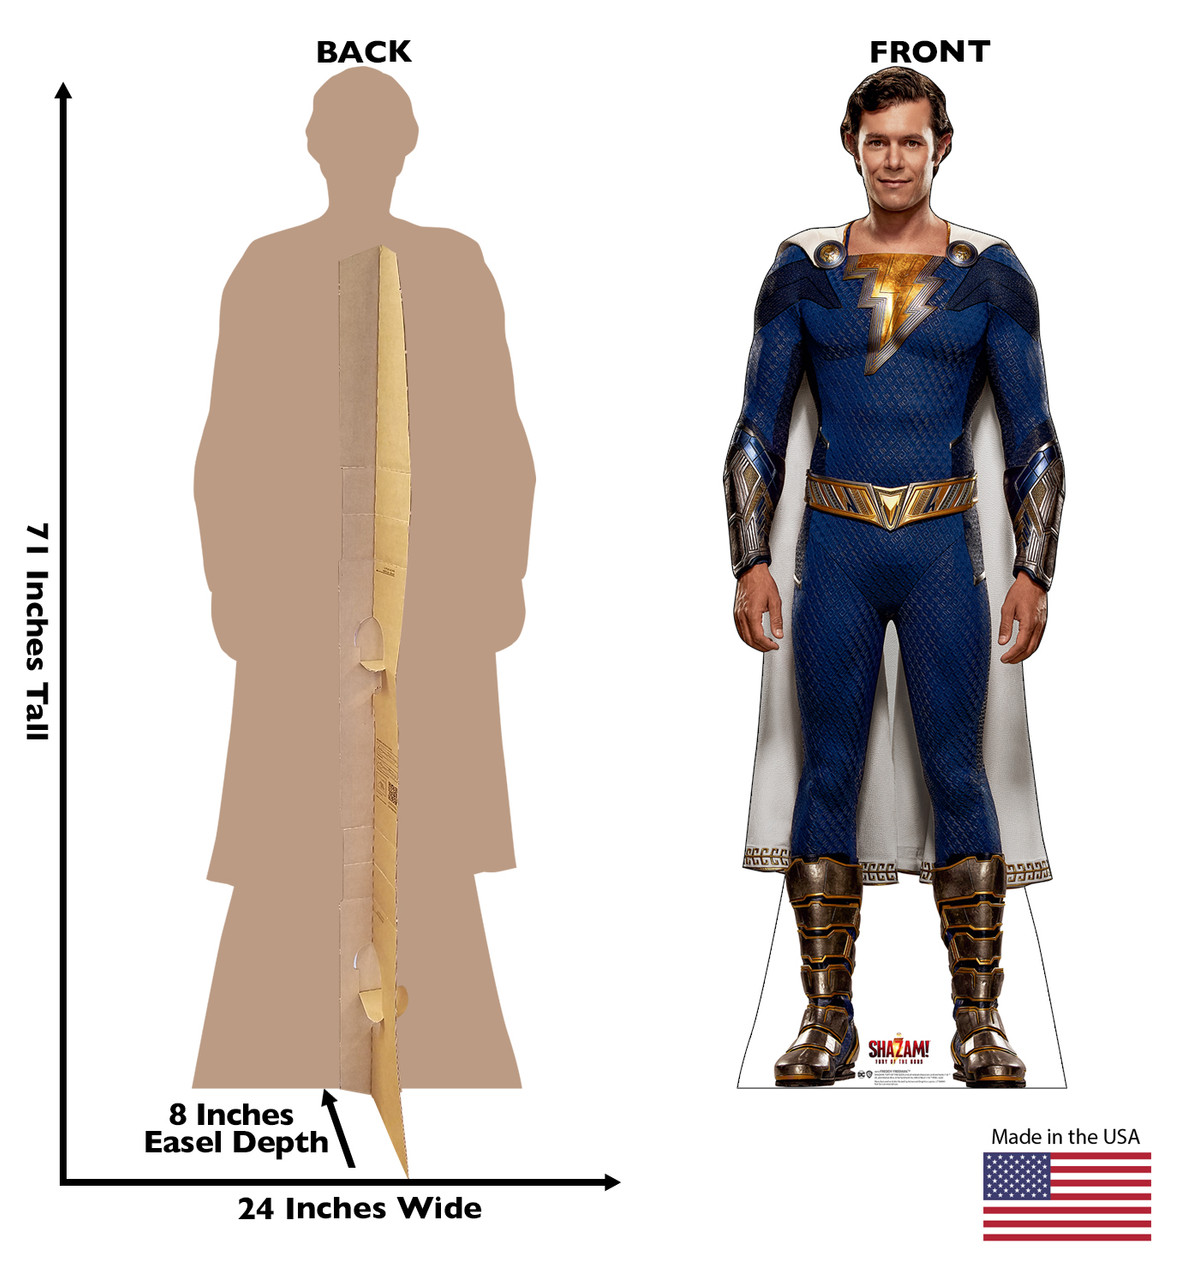 Life-size cardboard standee of Freddy Freeman from the new movie Shazam! Fury of the Gods with back and front dimensions.